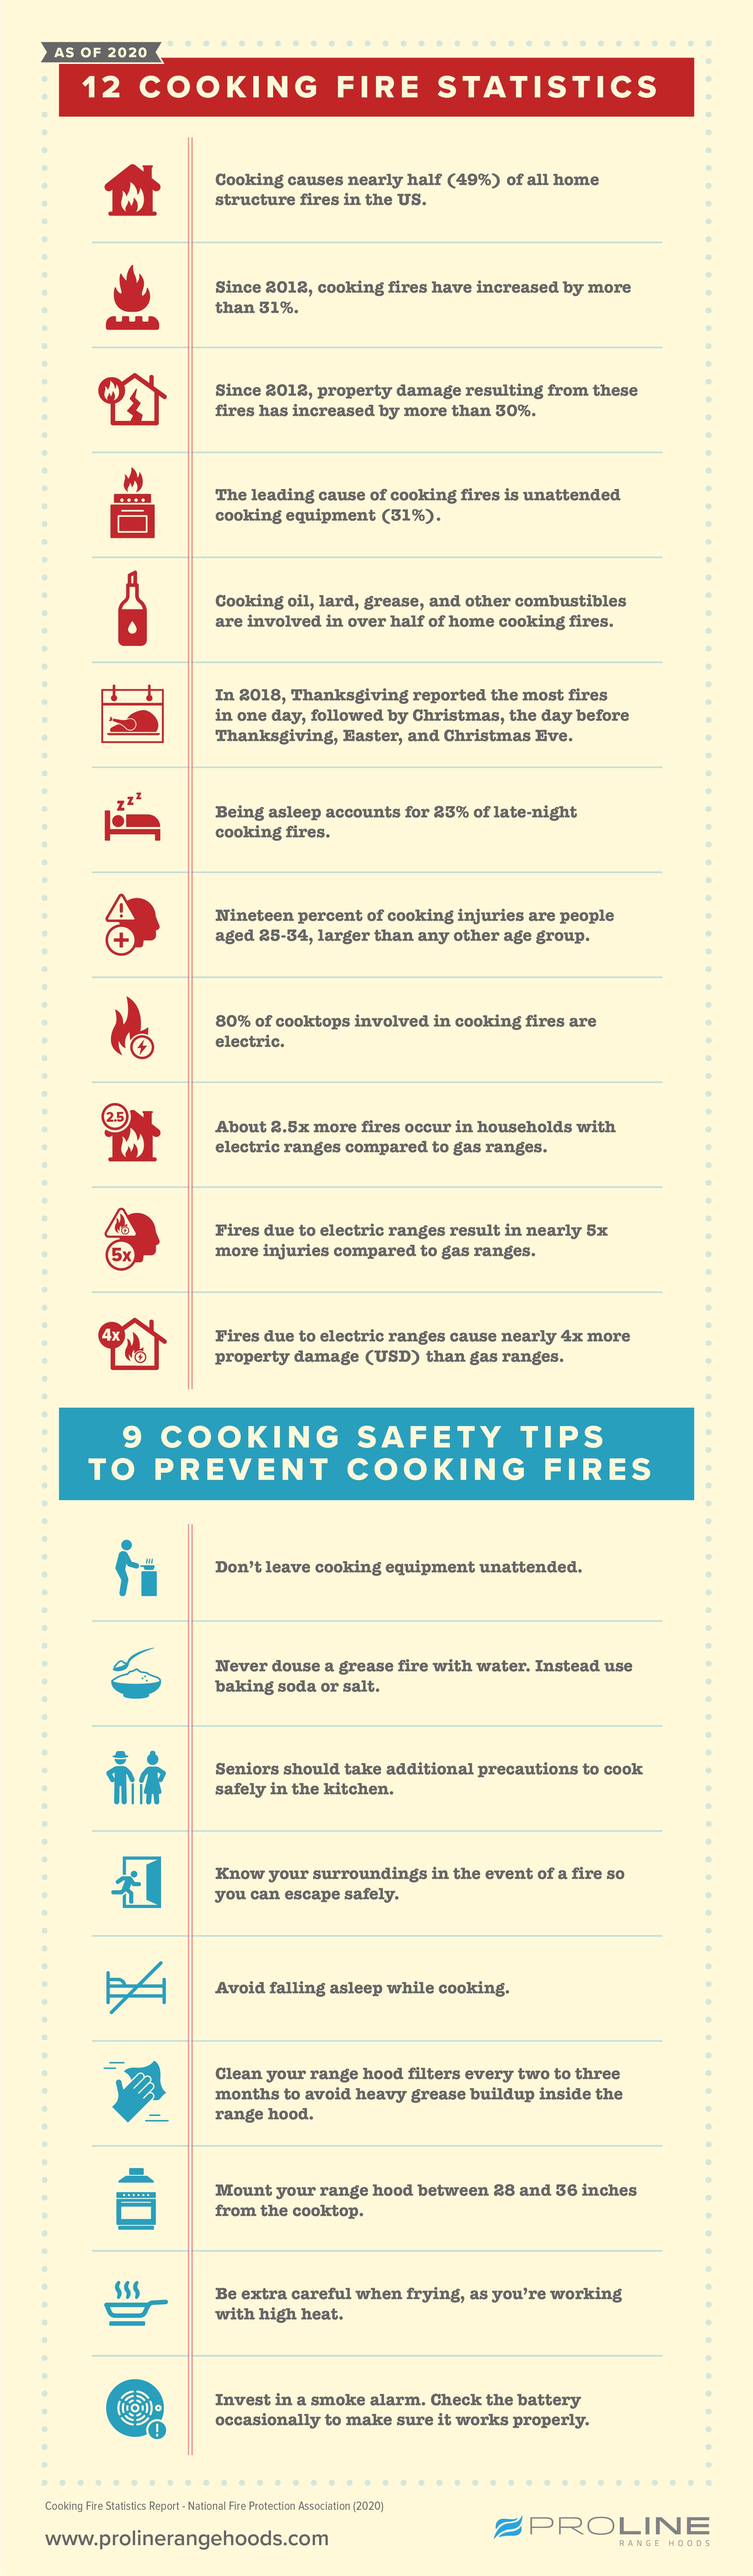 Kitchen firs statistics and kitchen safety tips - infographic